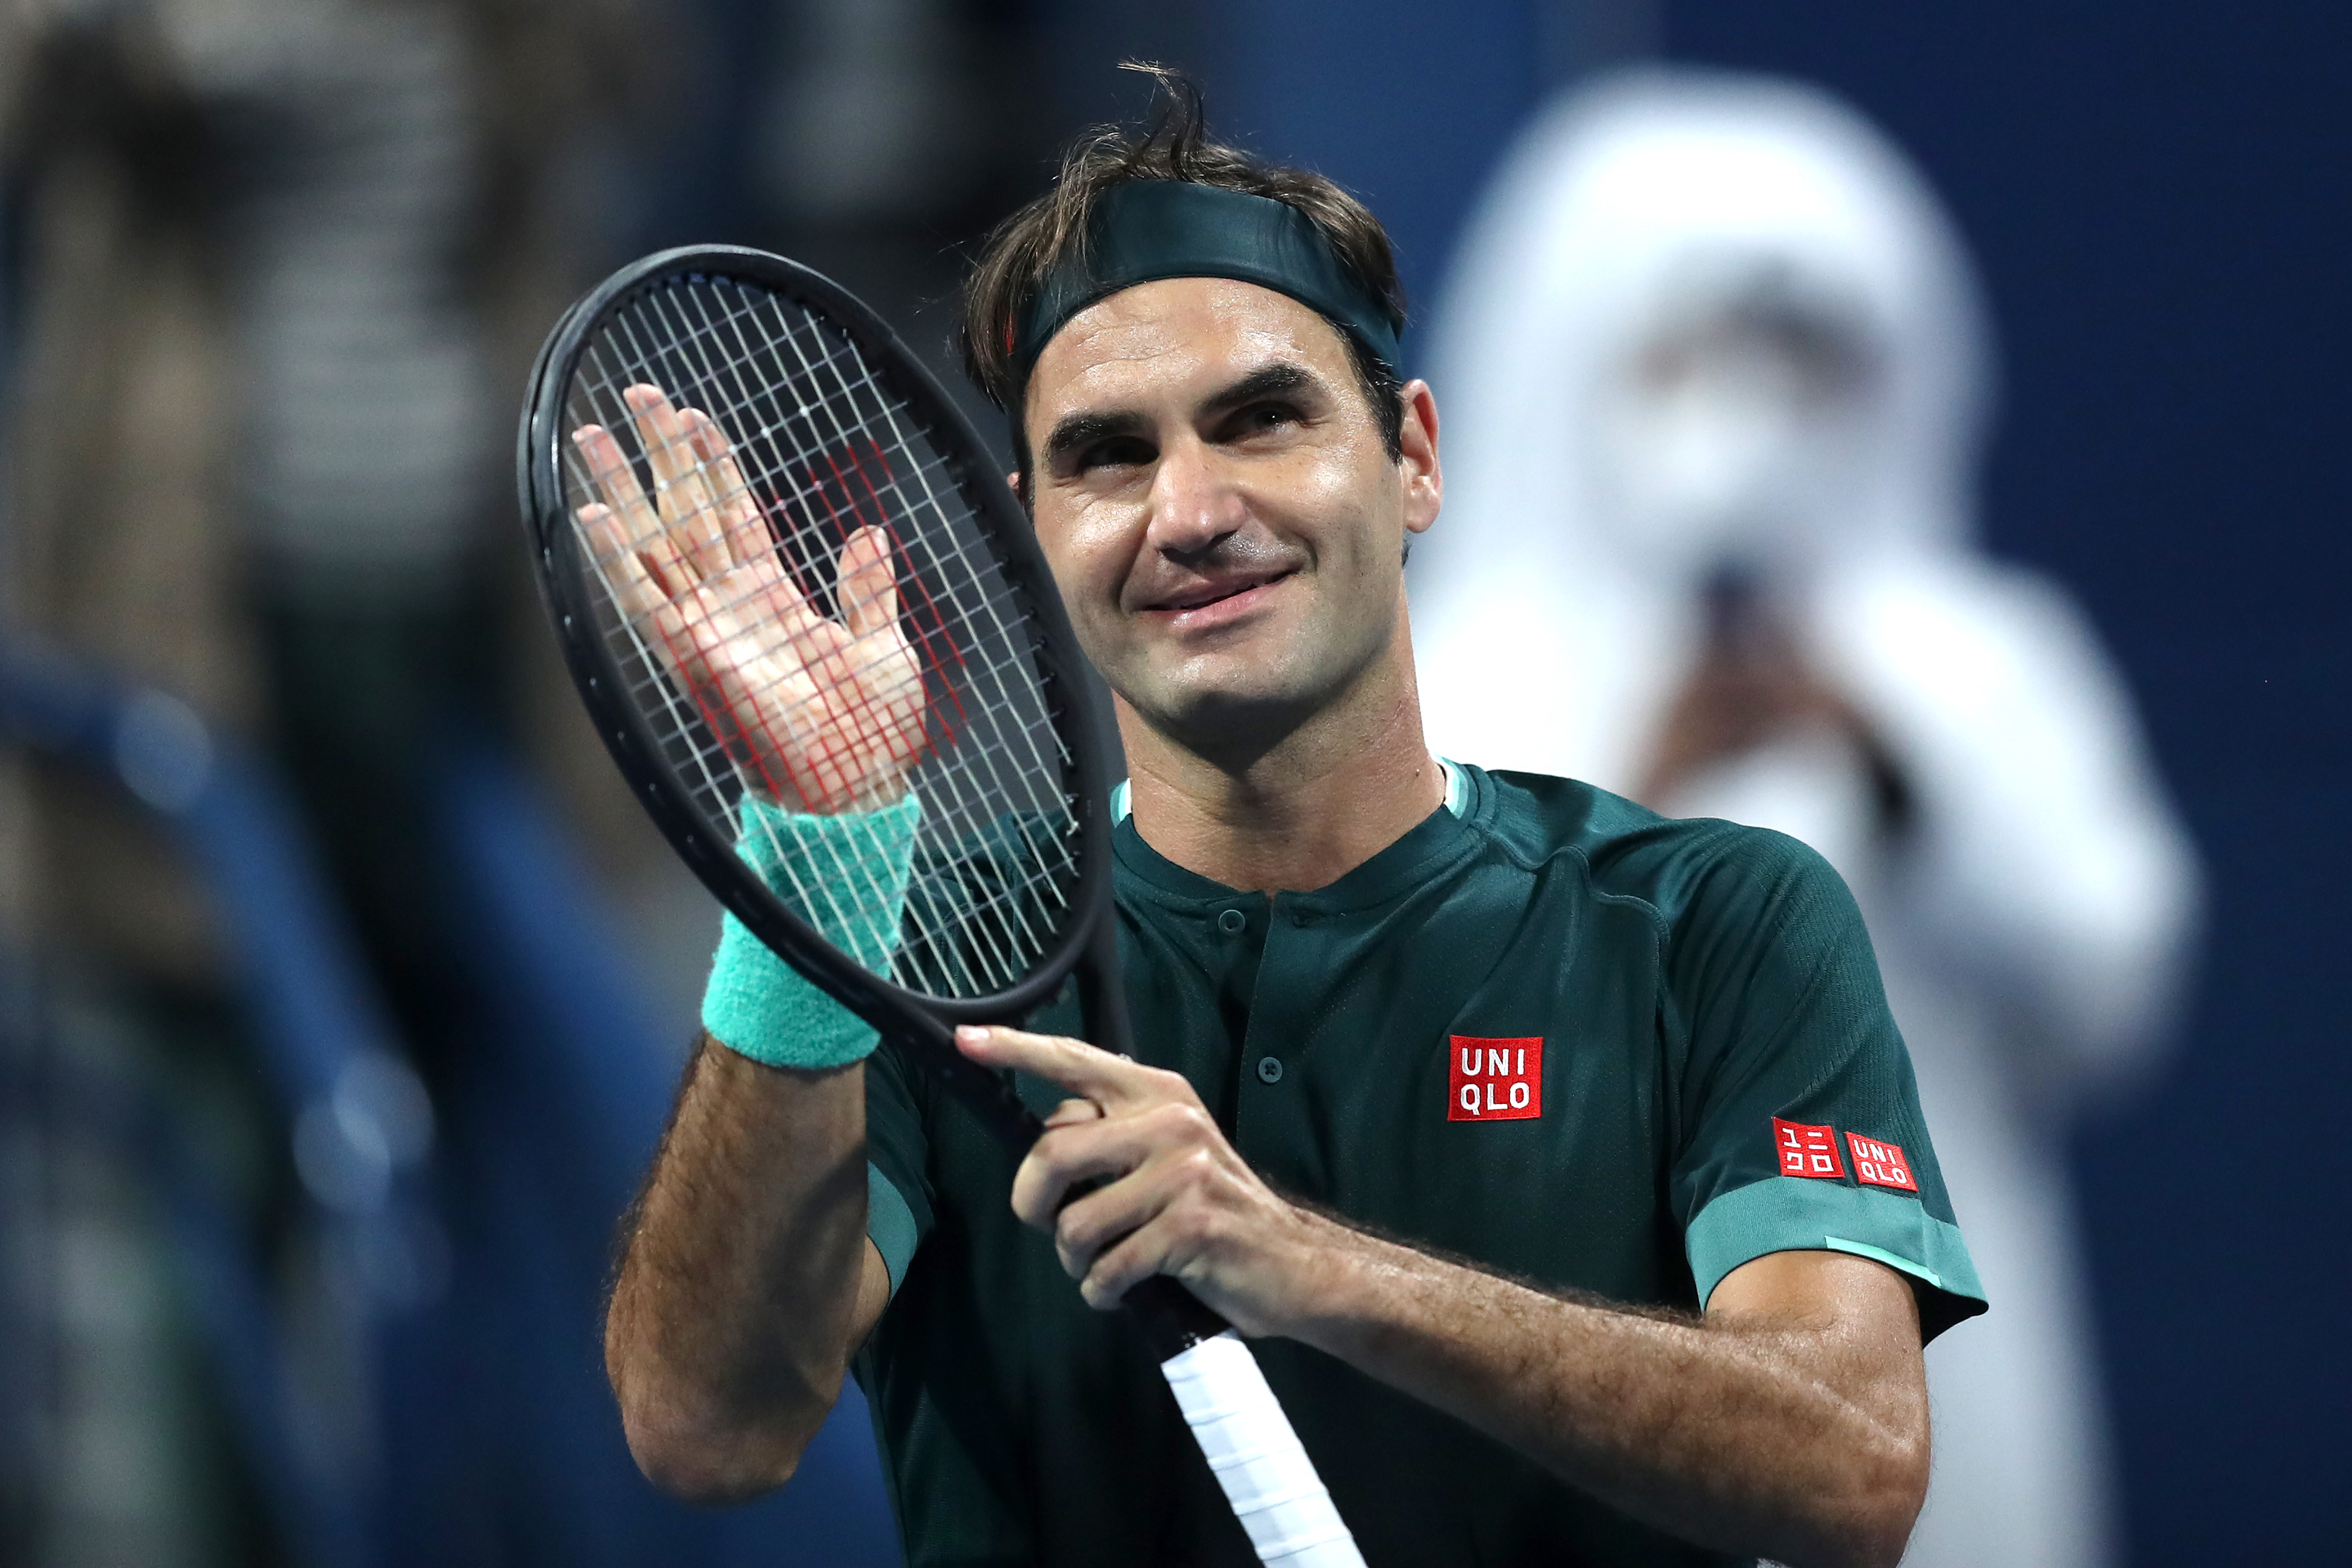 Roger Federer wins first match in 14 months, beating Dan Evans in Doha